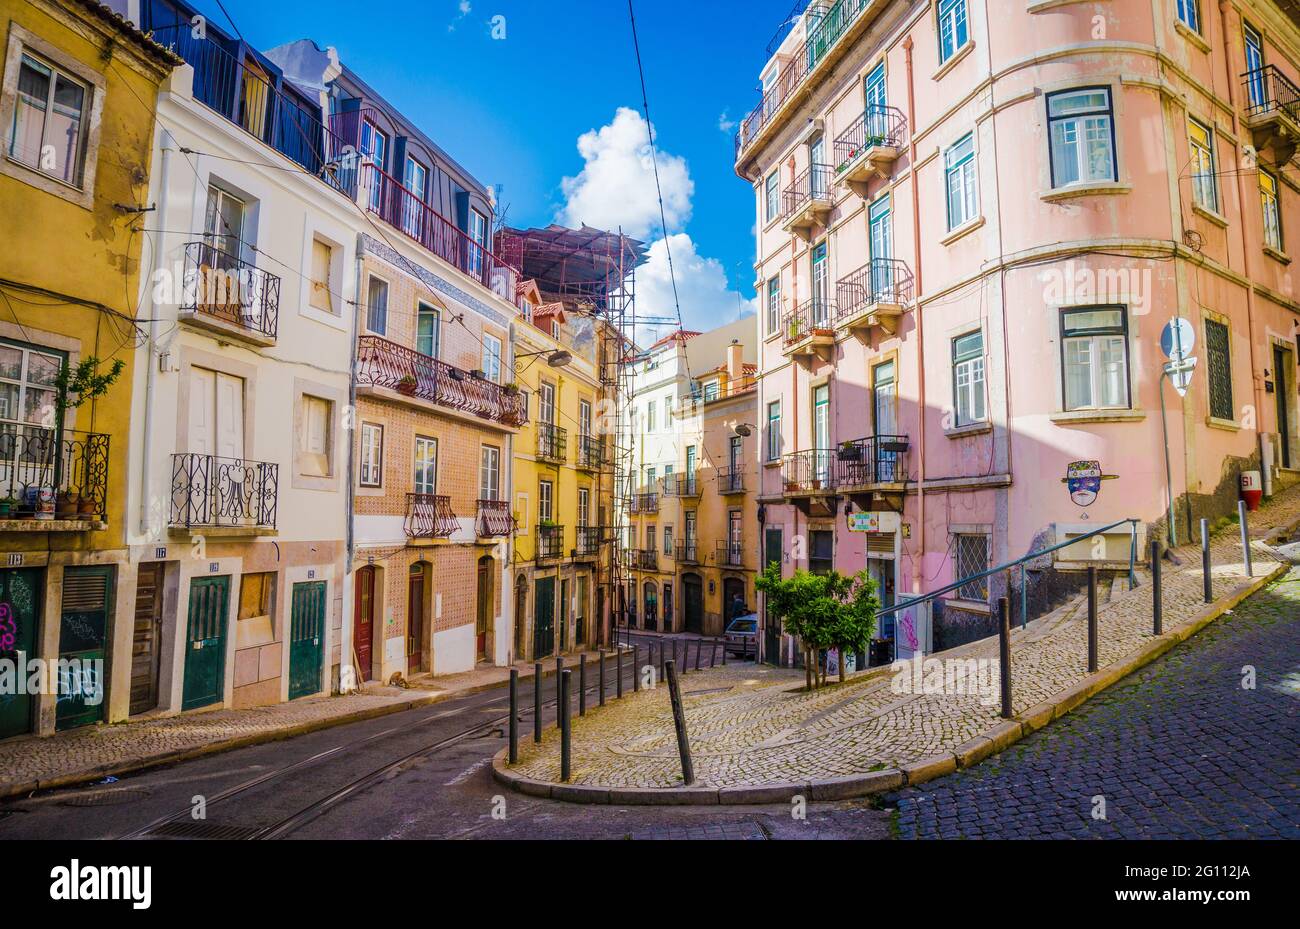 LISBON, PORTUGAL - MARCH 25, 2017: Rua Poiais de Sao Bento street with tram line in Lisbon. Typical streets with colorful buildings with no people, Po Stock Photo